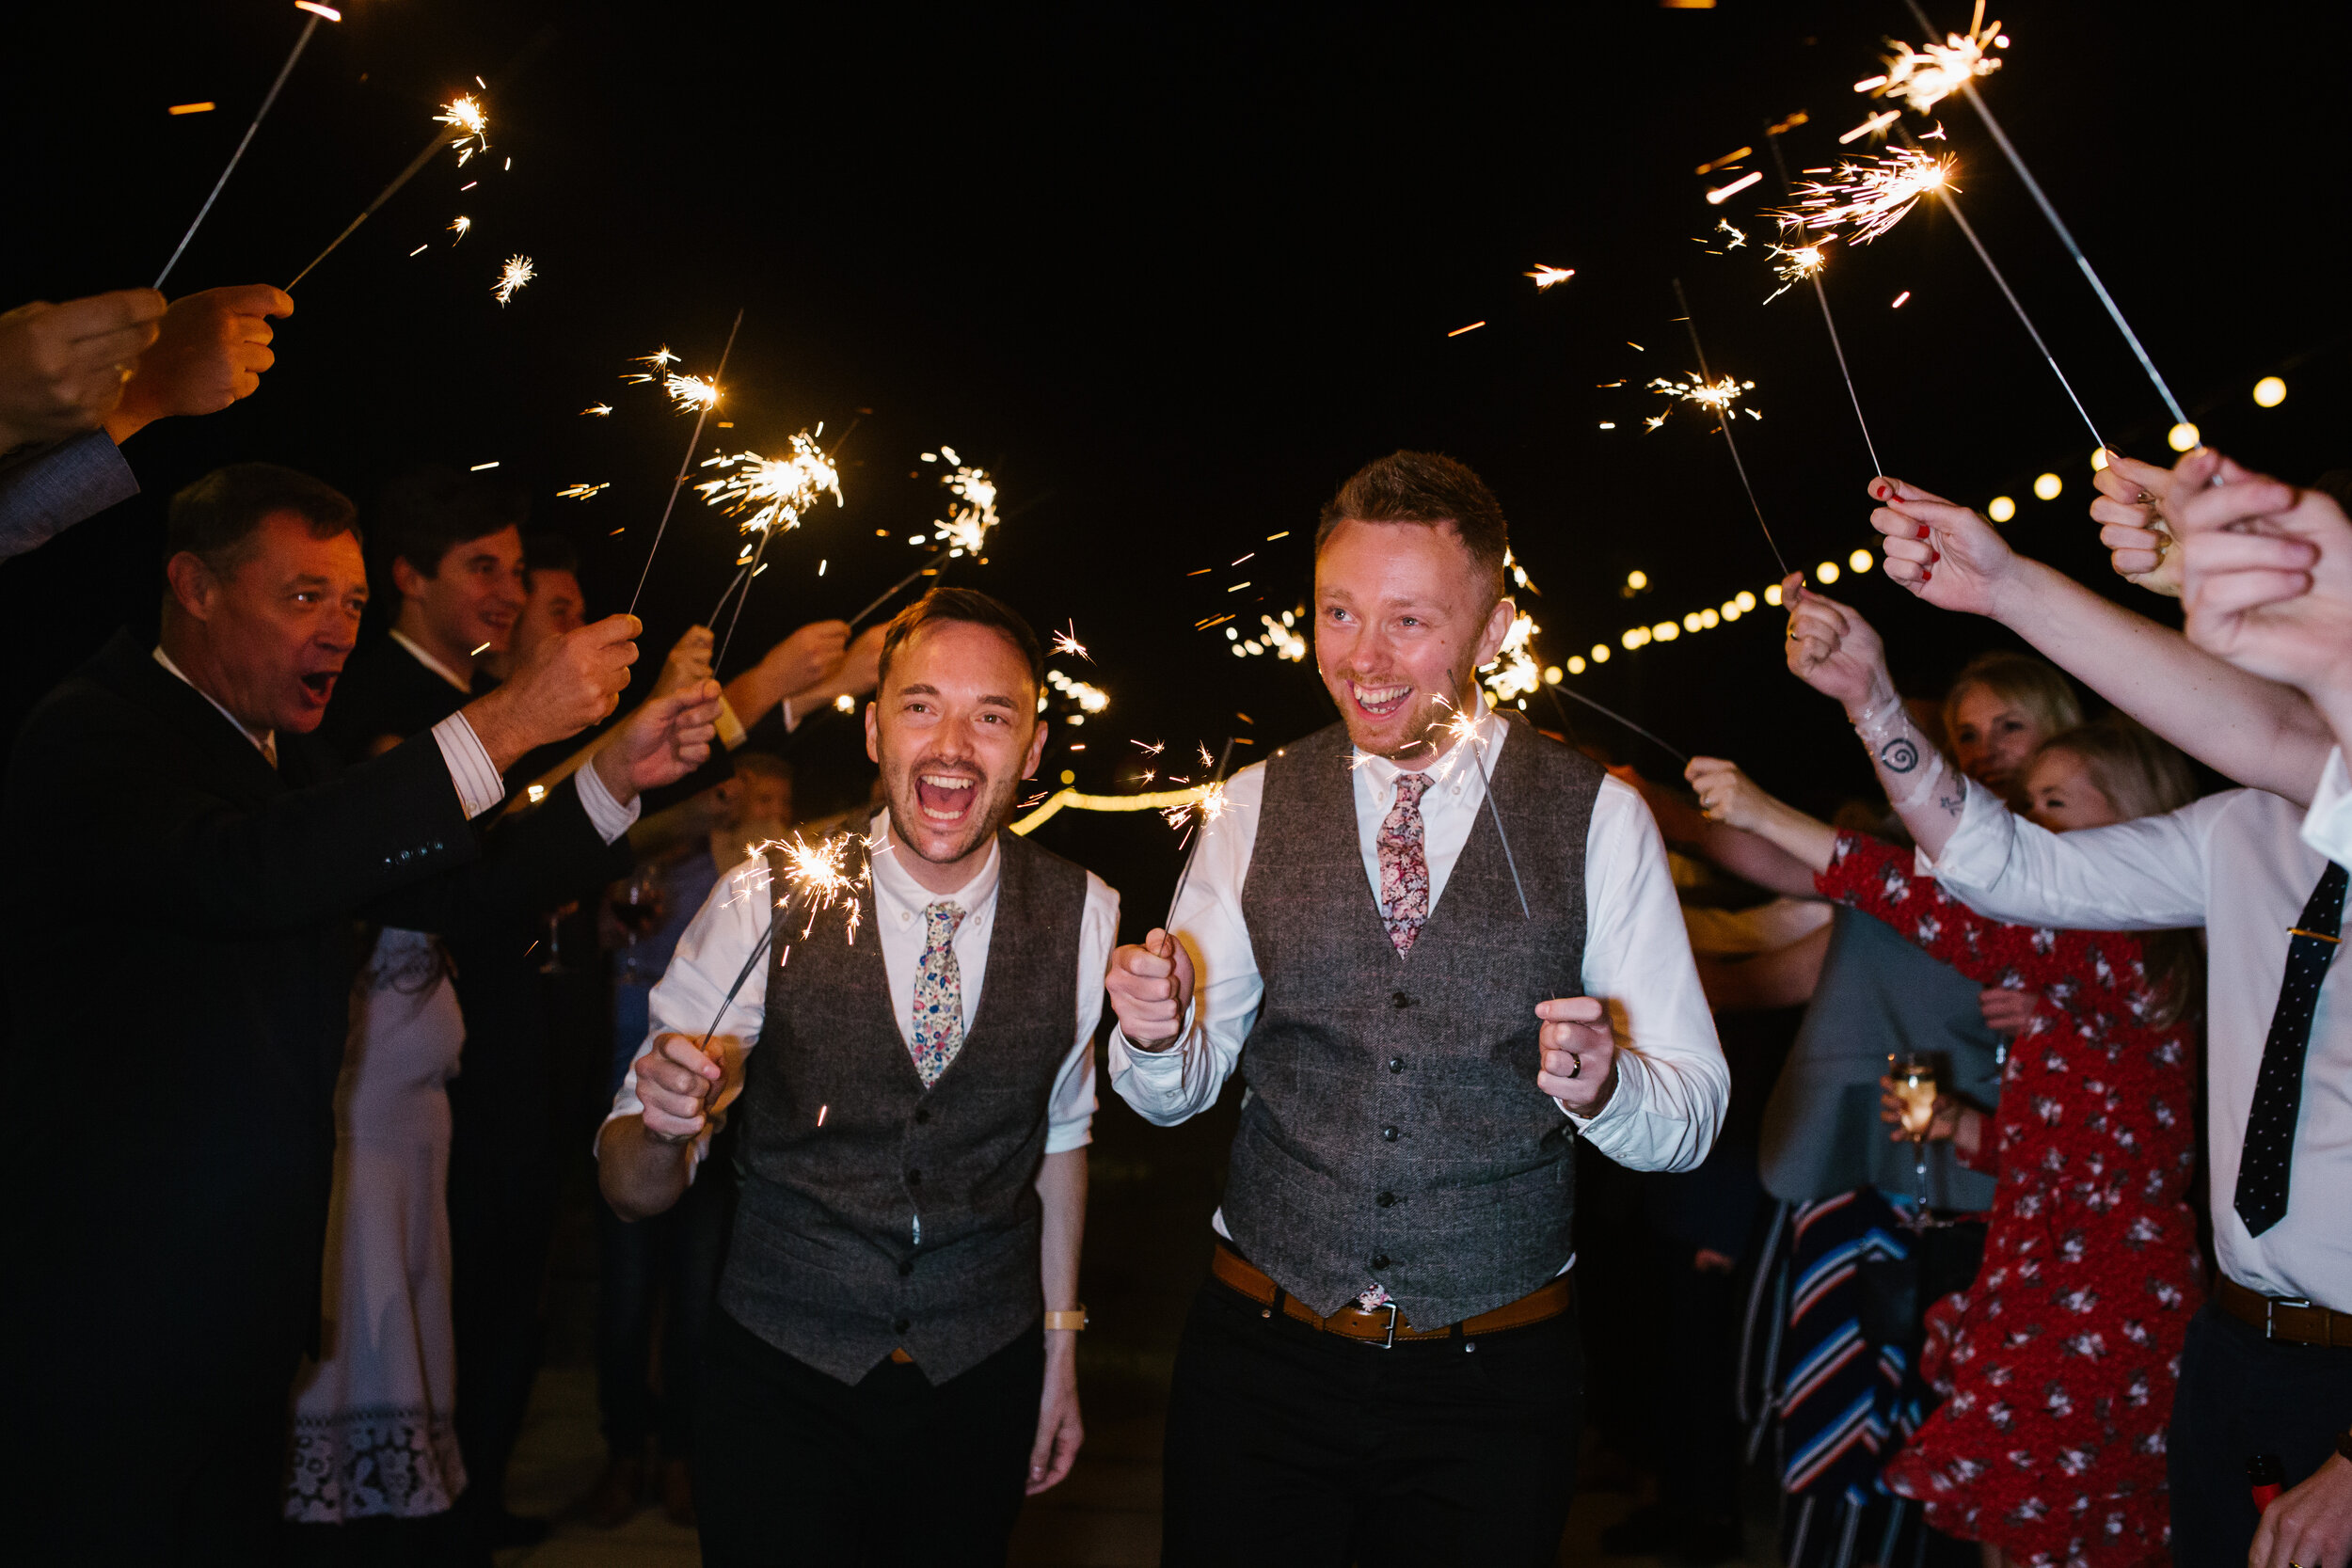 natural photo of grooms walking with sparklers